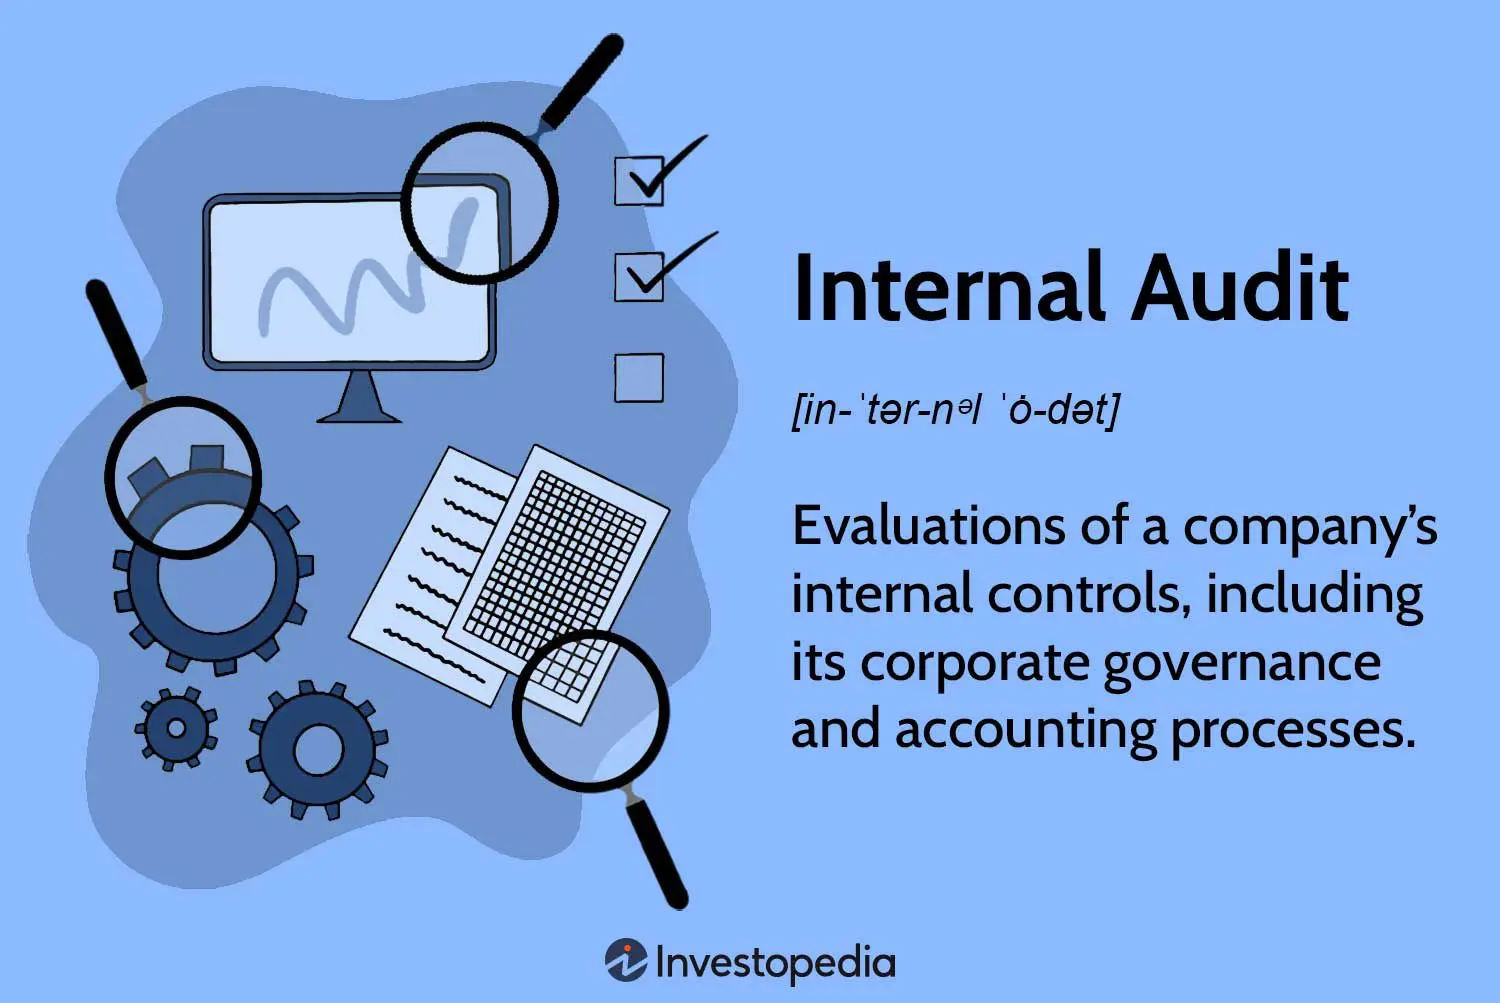 the internal auditor - Who is the internal auditor of the company